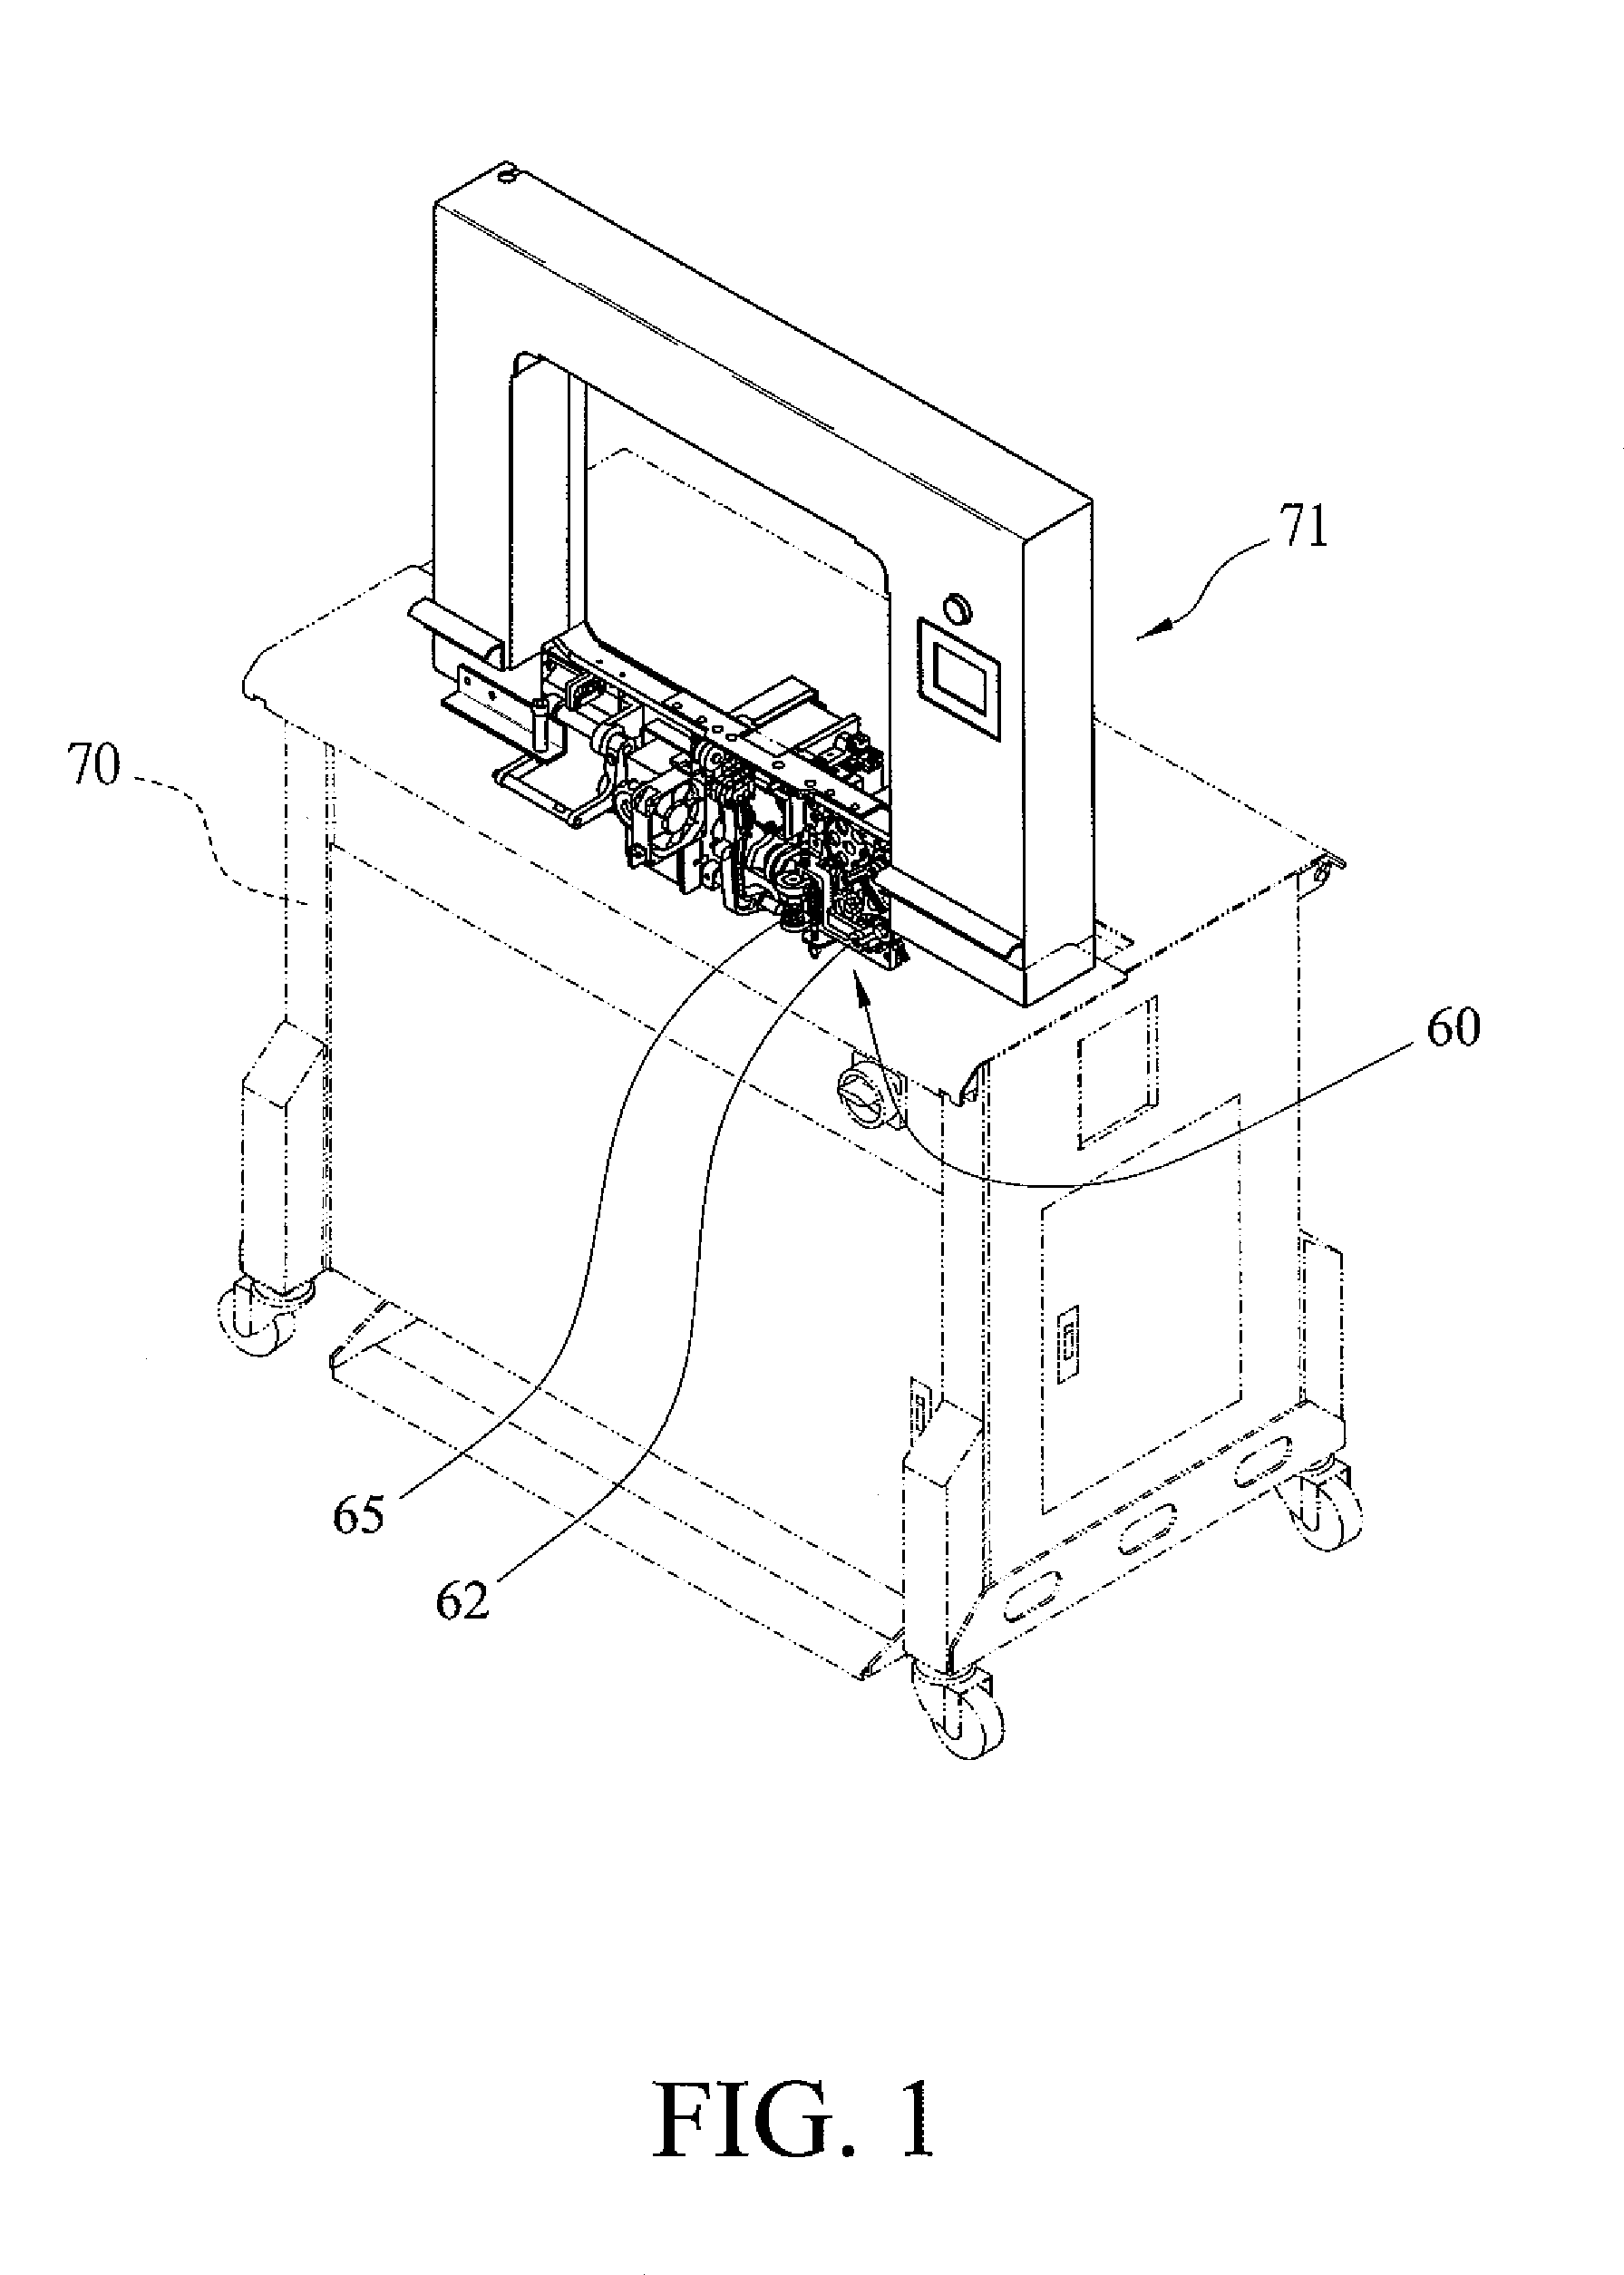 Reverse tension mechanism for a strapping machine